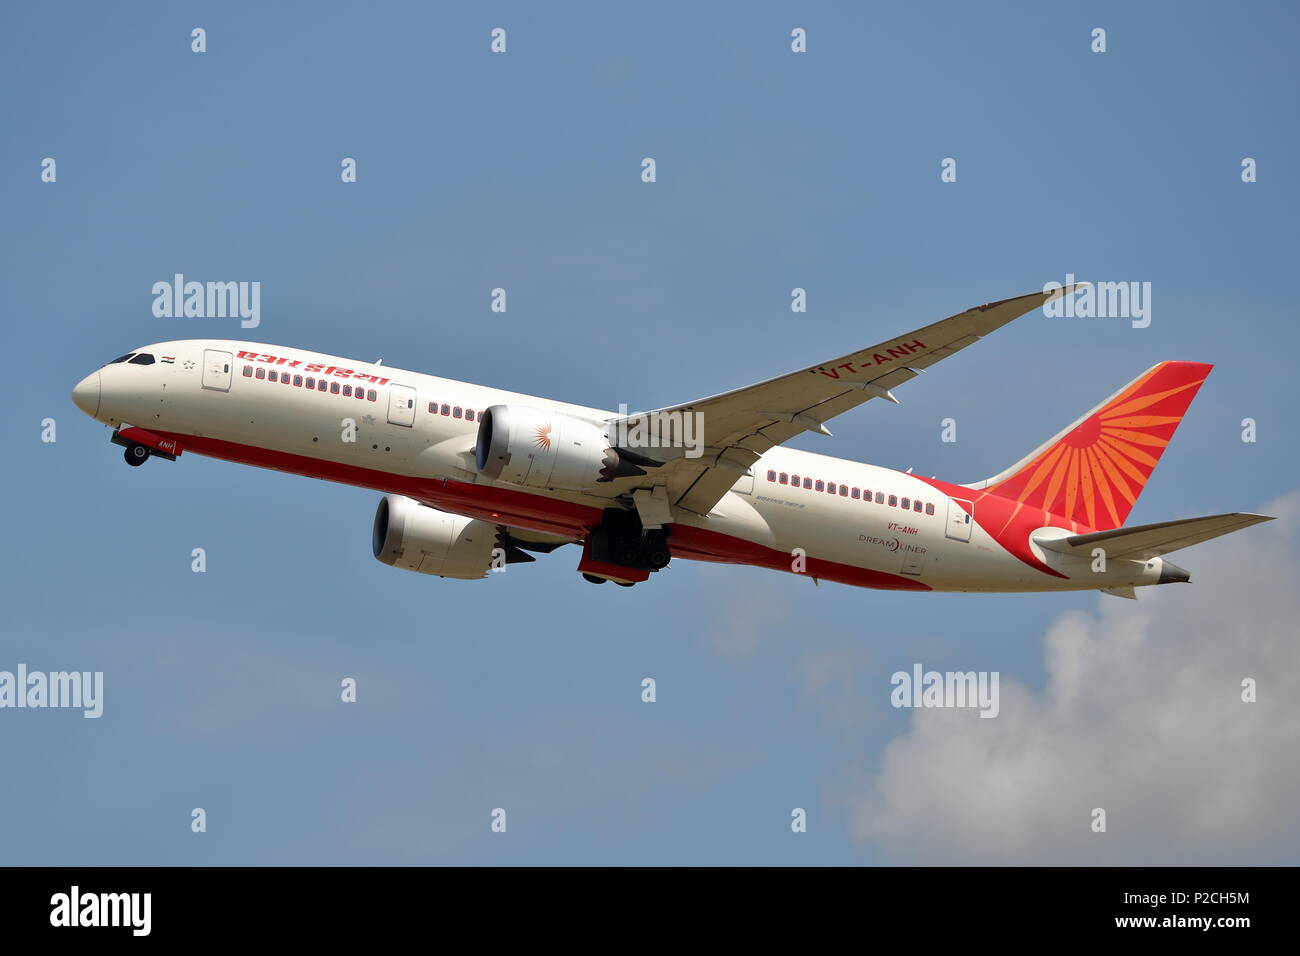 Air India Boeing 787-8 Dreamliner VT-ANH taking off from London Heathrow Airport, UK Stock Photo